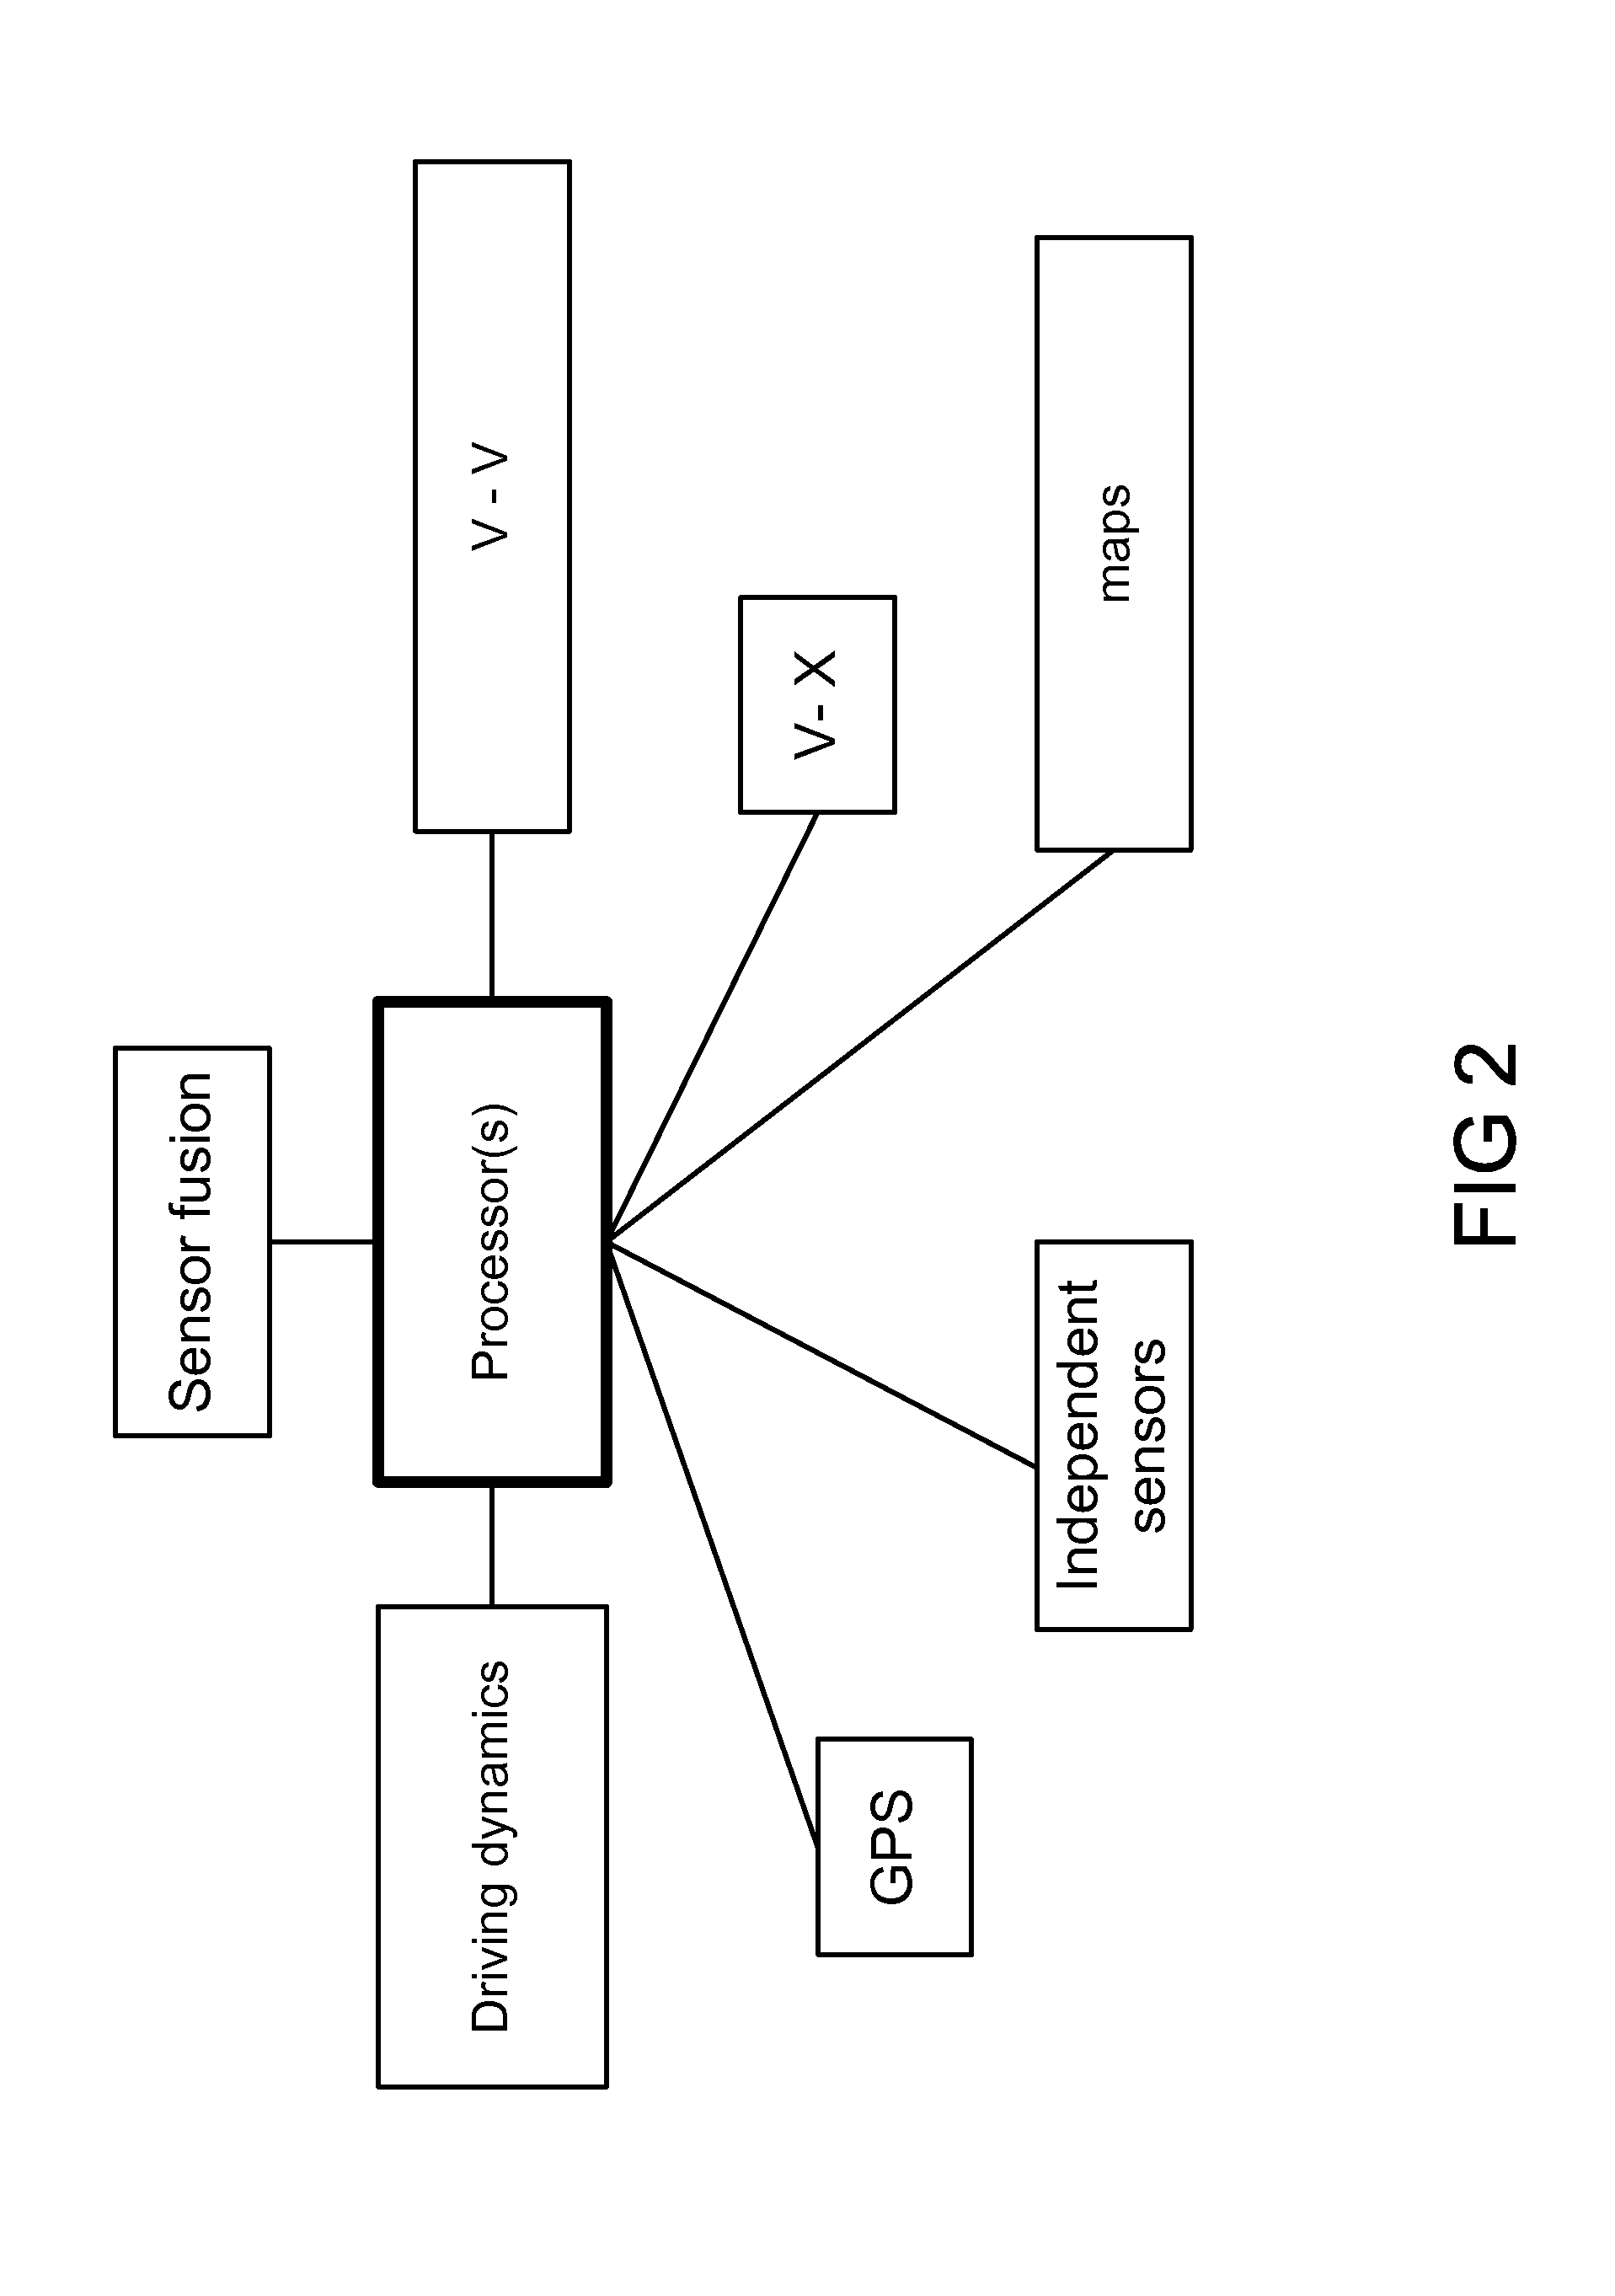 System and method for creating, storing, and updating local dynamic MAP database with safety attribute